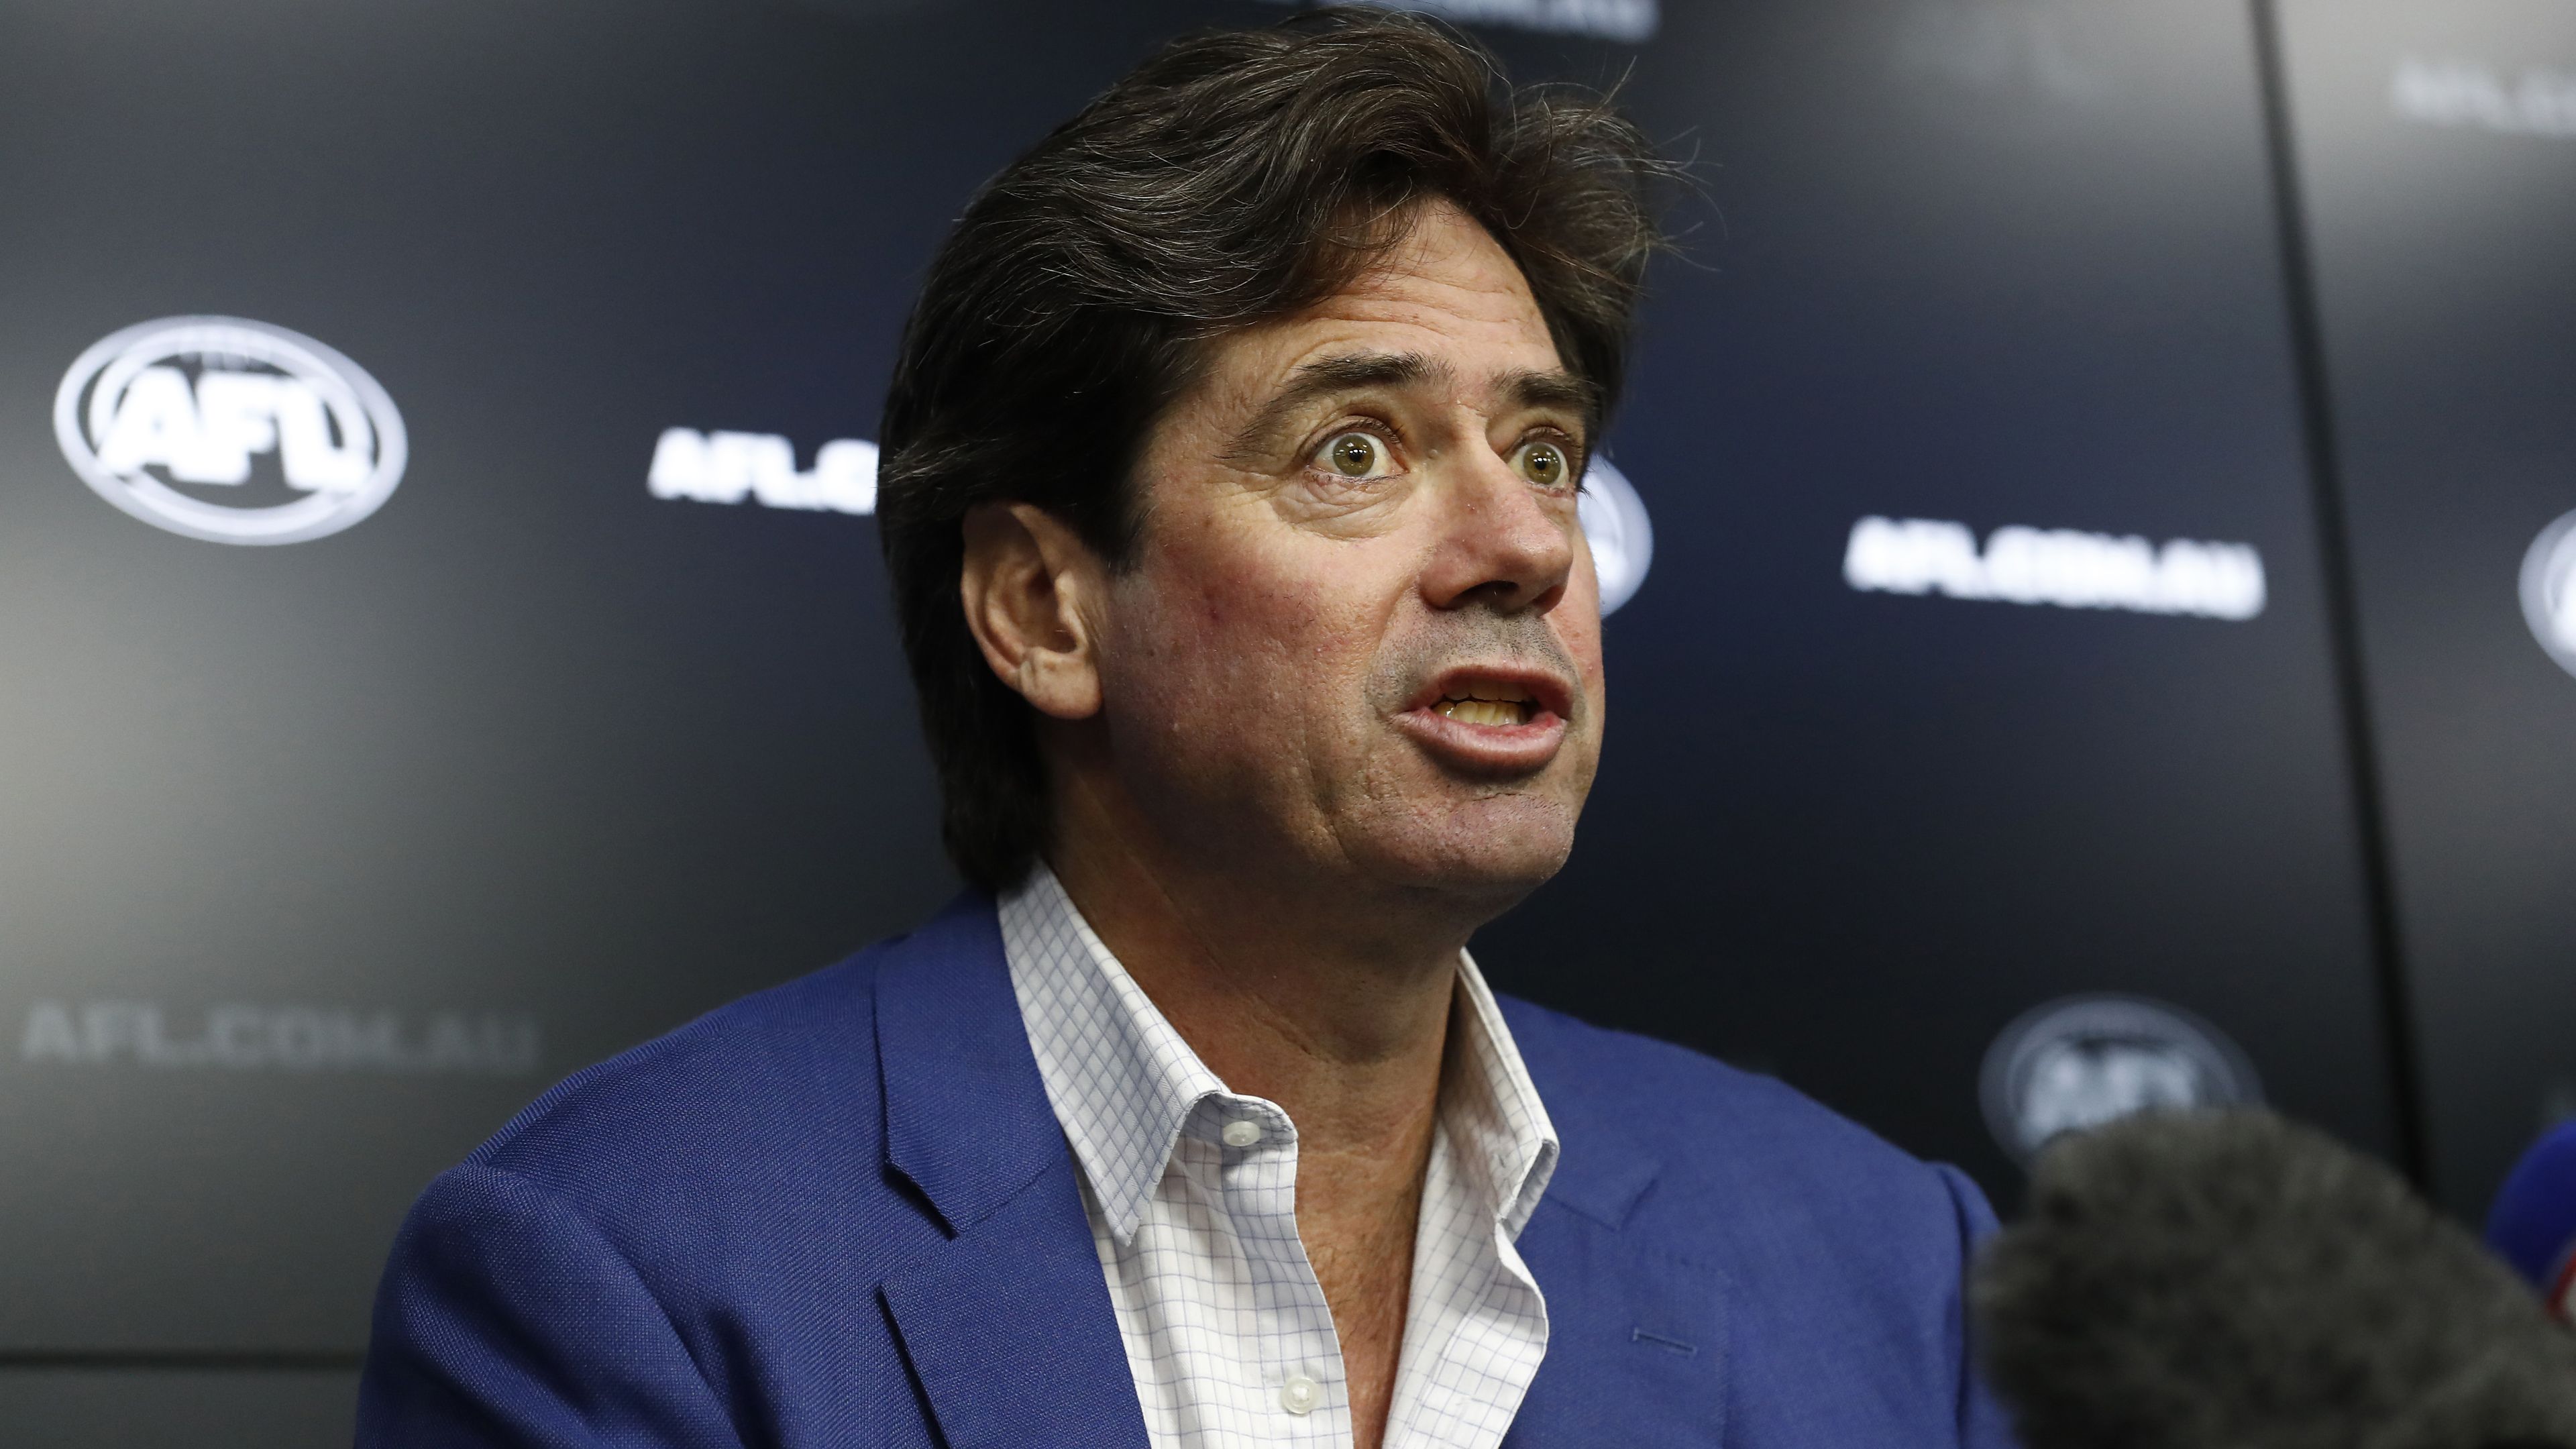 MELBOURNE, AUSTRALIA - MAY 30: AFL CEO Gillon McLachlan speaks to the media during a press conference at AFL House on May 30, 2023 in Melbourne, Australia. McLachlan spoke about the outcomes in relation to the Independent Panel Investigation into allegations of inappropriate conduct at the Hawthorn Hawks. (Photo by Darrian Traynor/Getty Images)